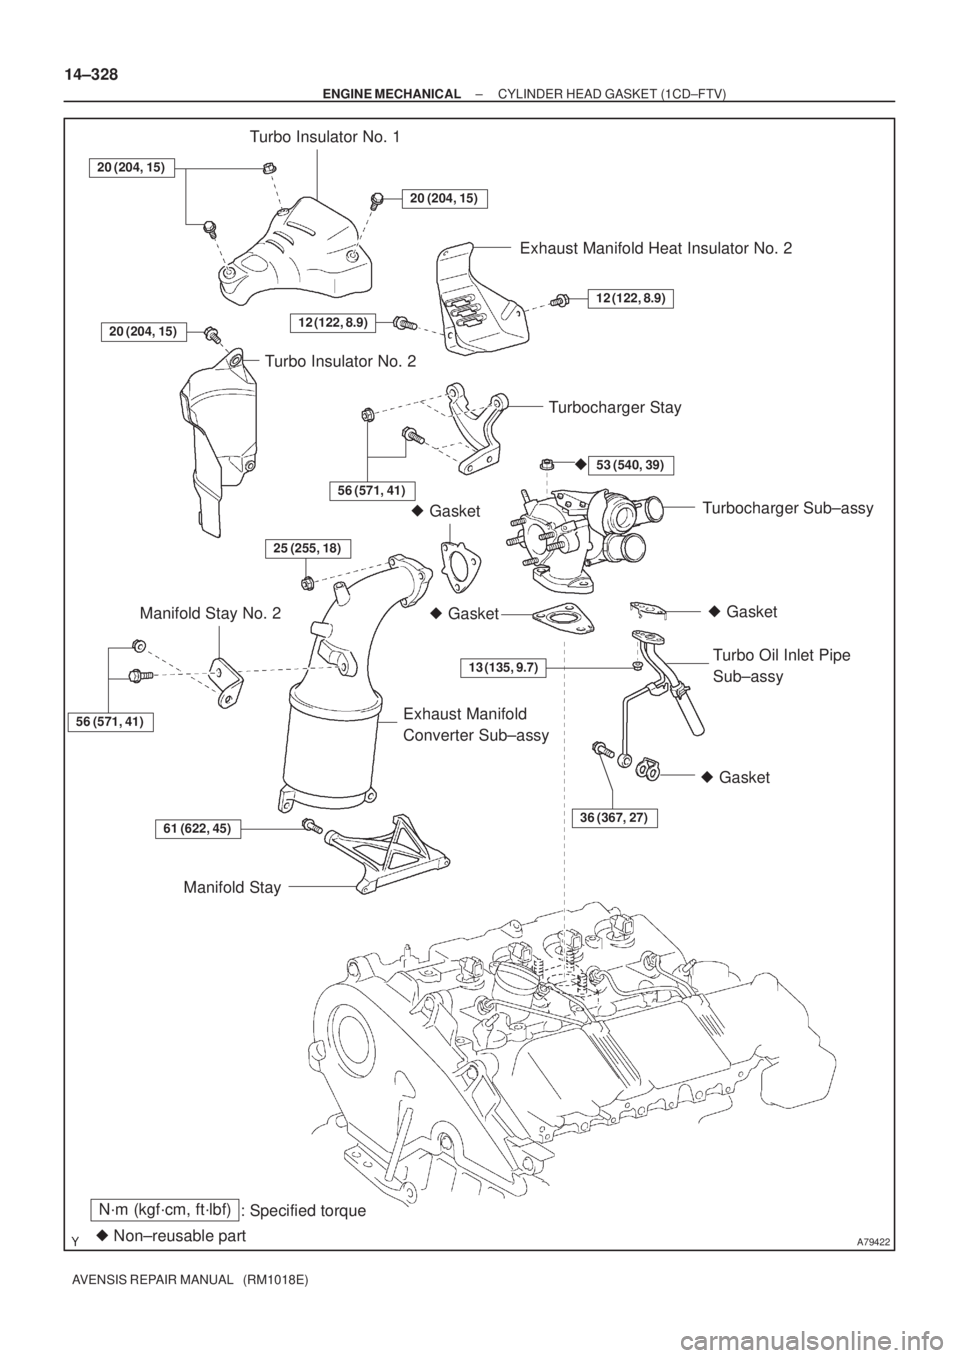 TOYOTA AVENSIS 2005  Service Repair Manual A79422
N´m (kgf´cm, ft´lbf)
: Specified torque
 Non±reusable part Gasket
 Gasket  Gasket
20 (204, 15)
20 (204, 15)
12 (122, 8.9)
53 (540, 39)
13 (135, 9.7)
36 (367, 27)61 (622, 45)
56 (571, 41